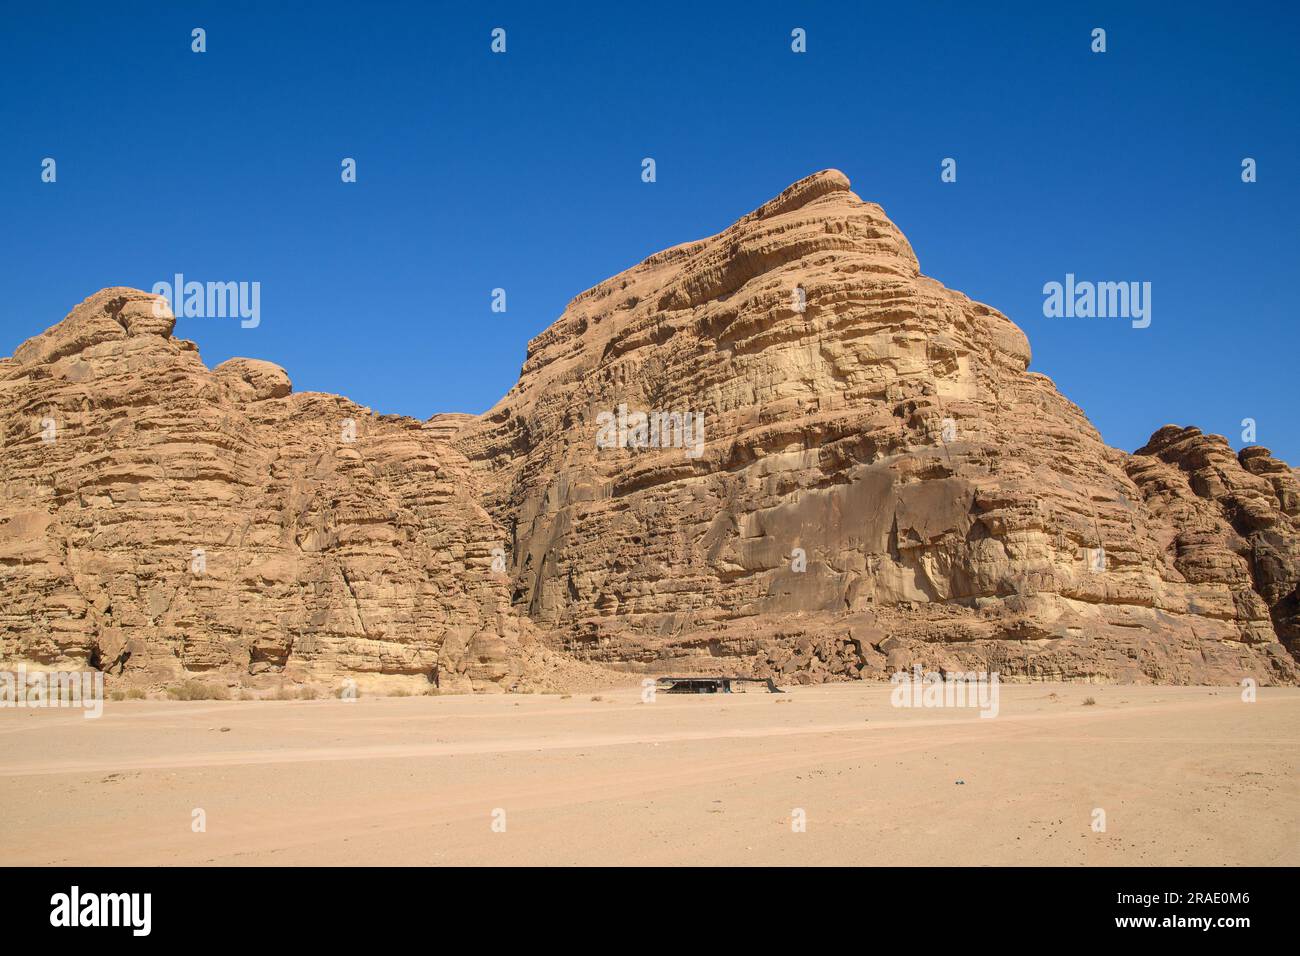 Arabian desert. Wadi Rum. Space landscape. Footprints in the sand. Filming location for many science fiction films. Stock Photo